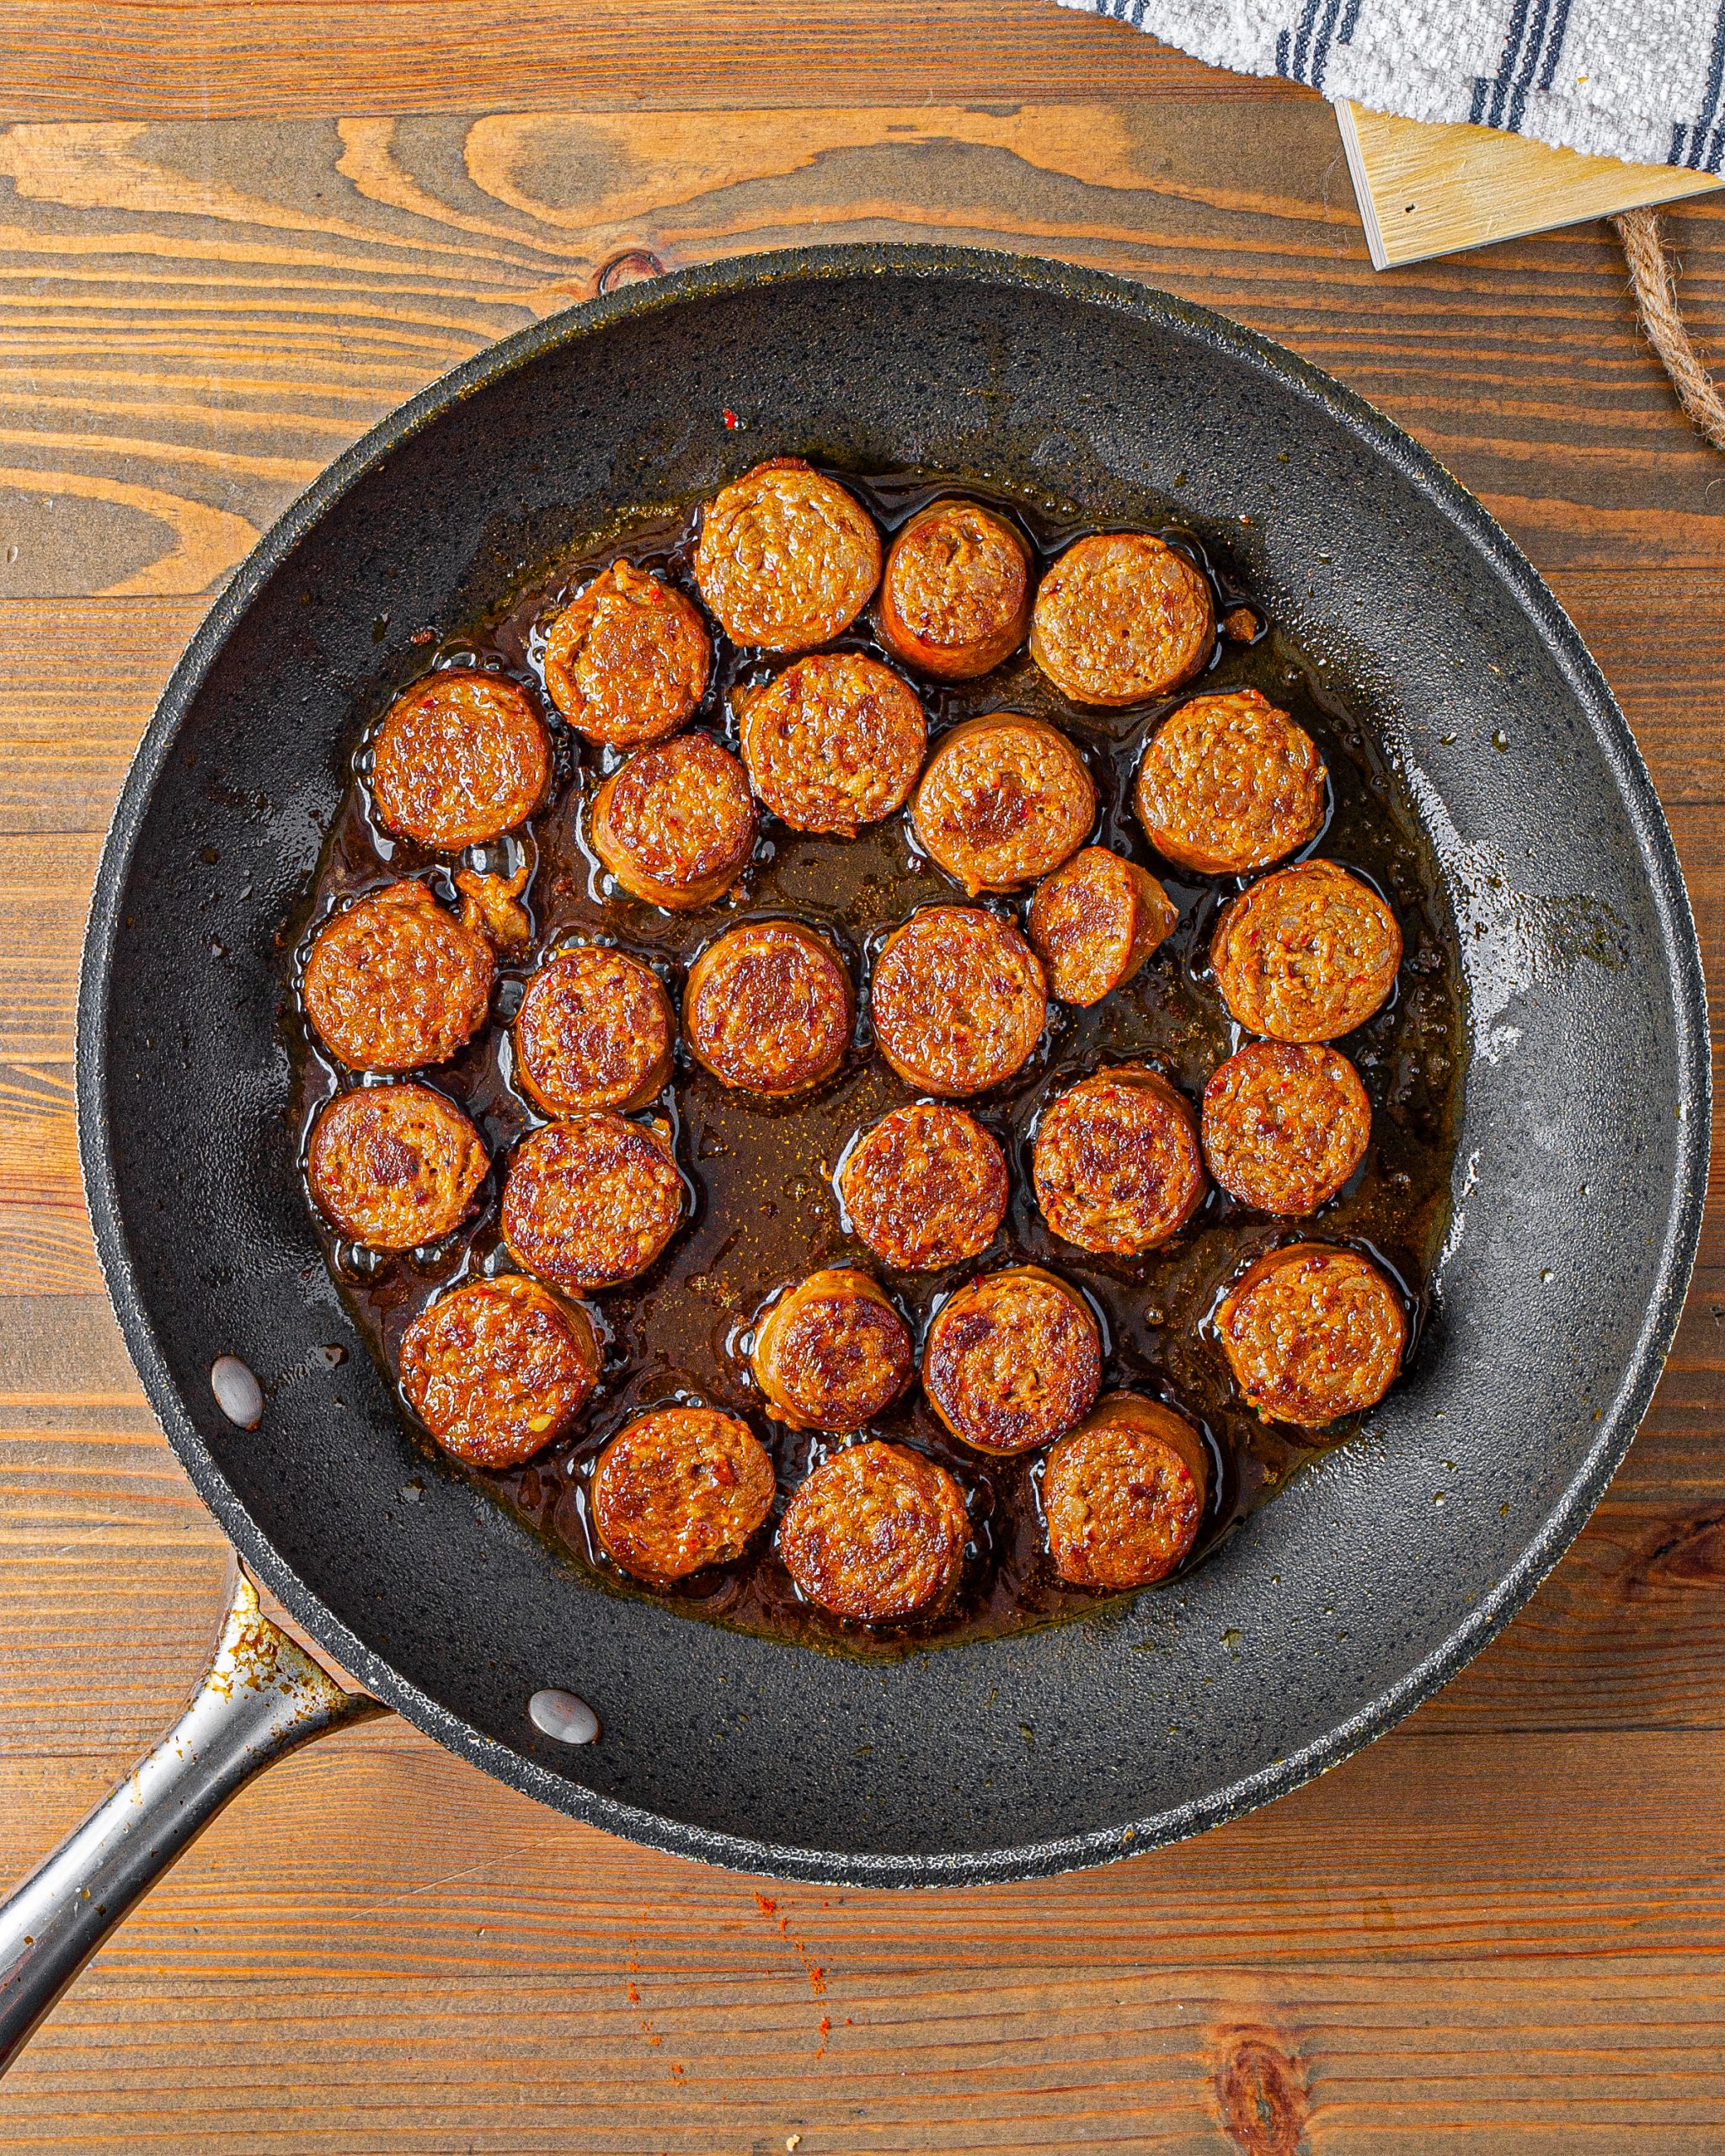 Heat a tablespoon of oil in a skillet over medium-high heat, and saute the sausage until browned on both sides and cooked through. Remove the sausage and set aside. 